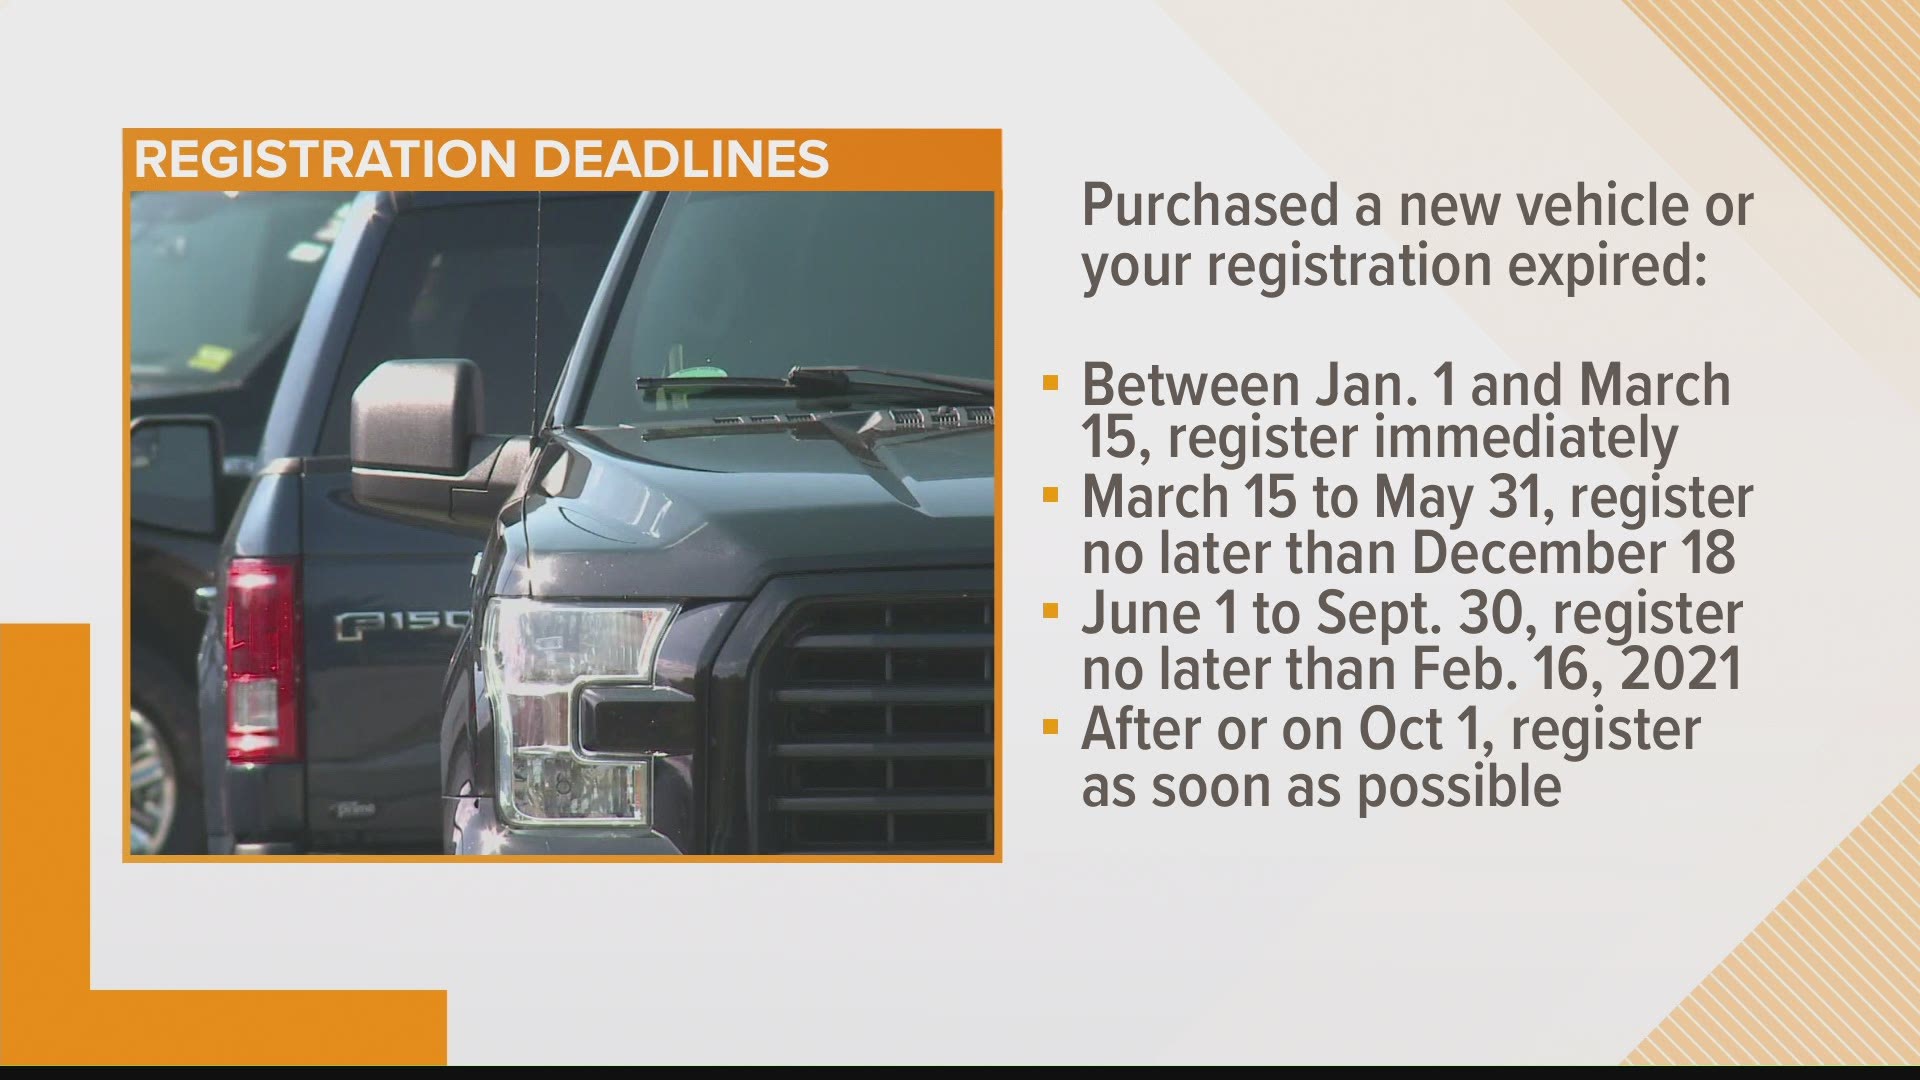 Car registration deadlines are now back into effect.